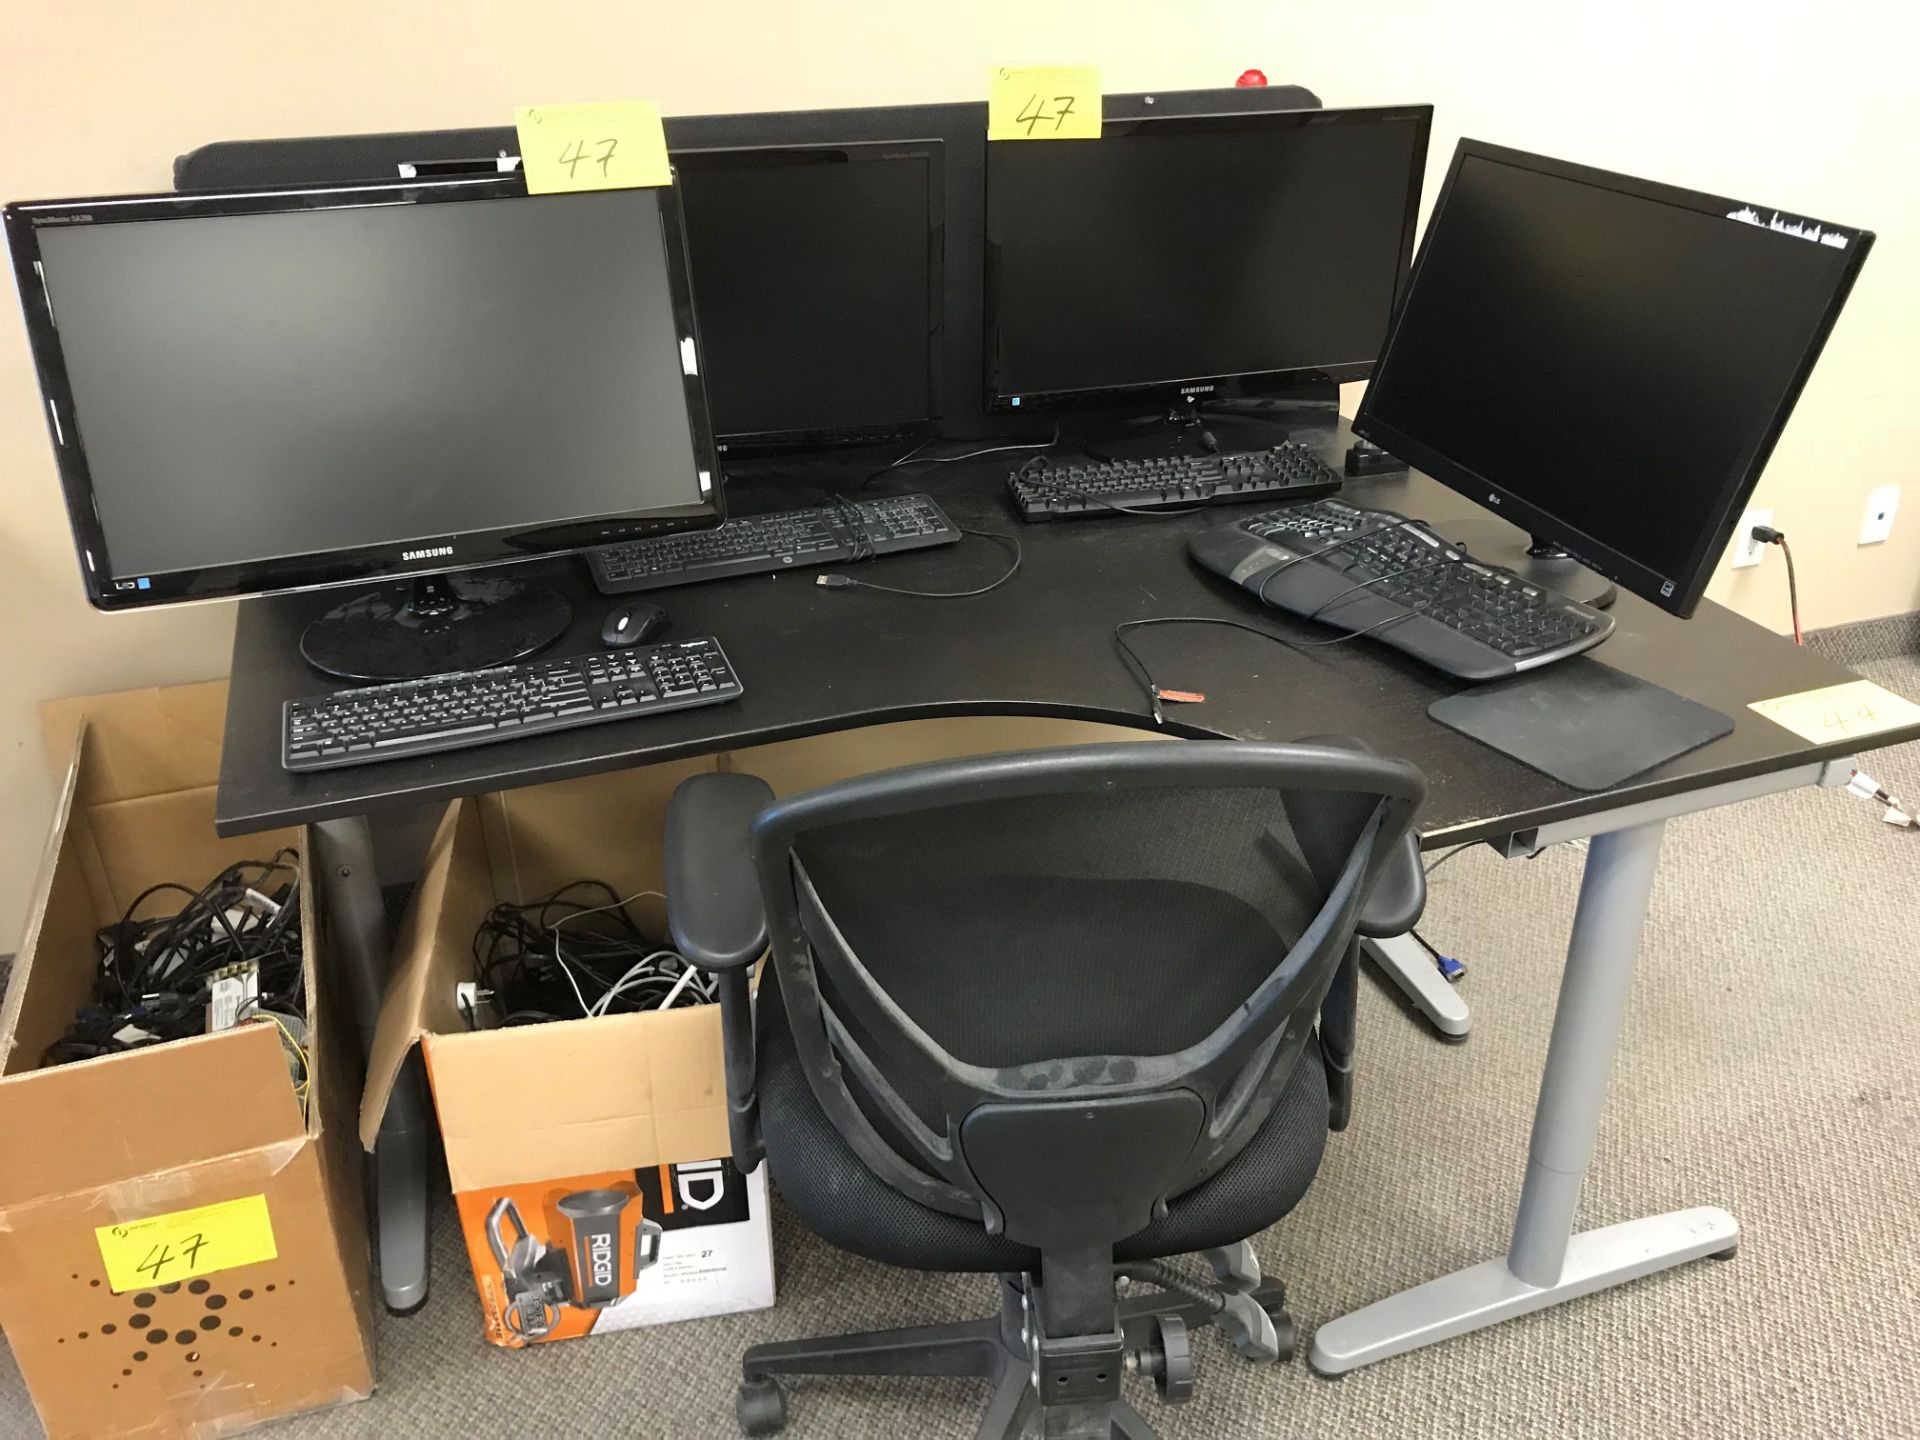 LOT OF ASST. COMPUTER EQUIPMENT, MONITORS, KEYBOARDS, PRINTERS, ETC. - Image 3 of 4